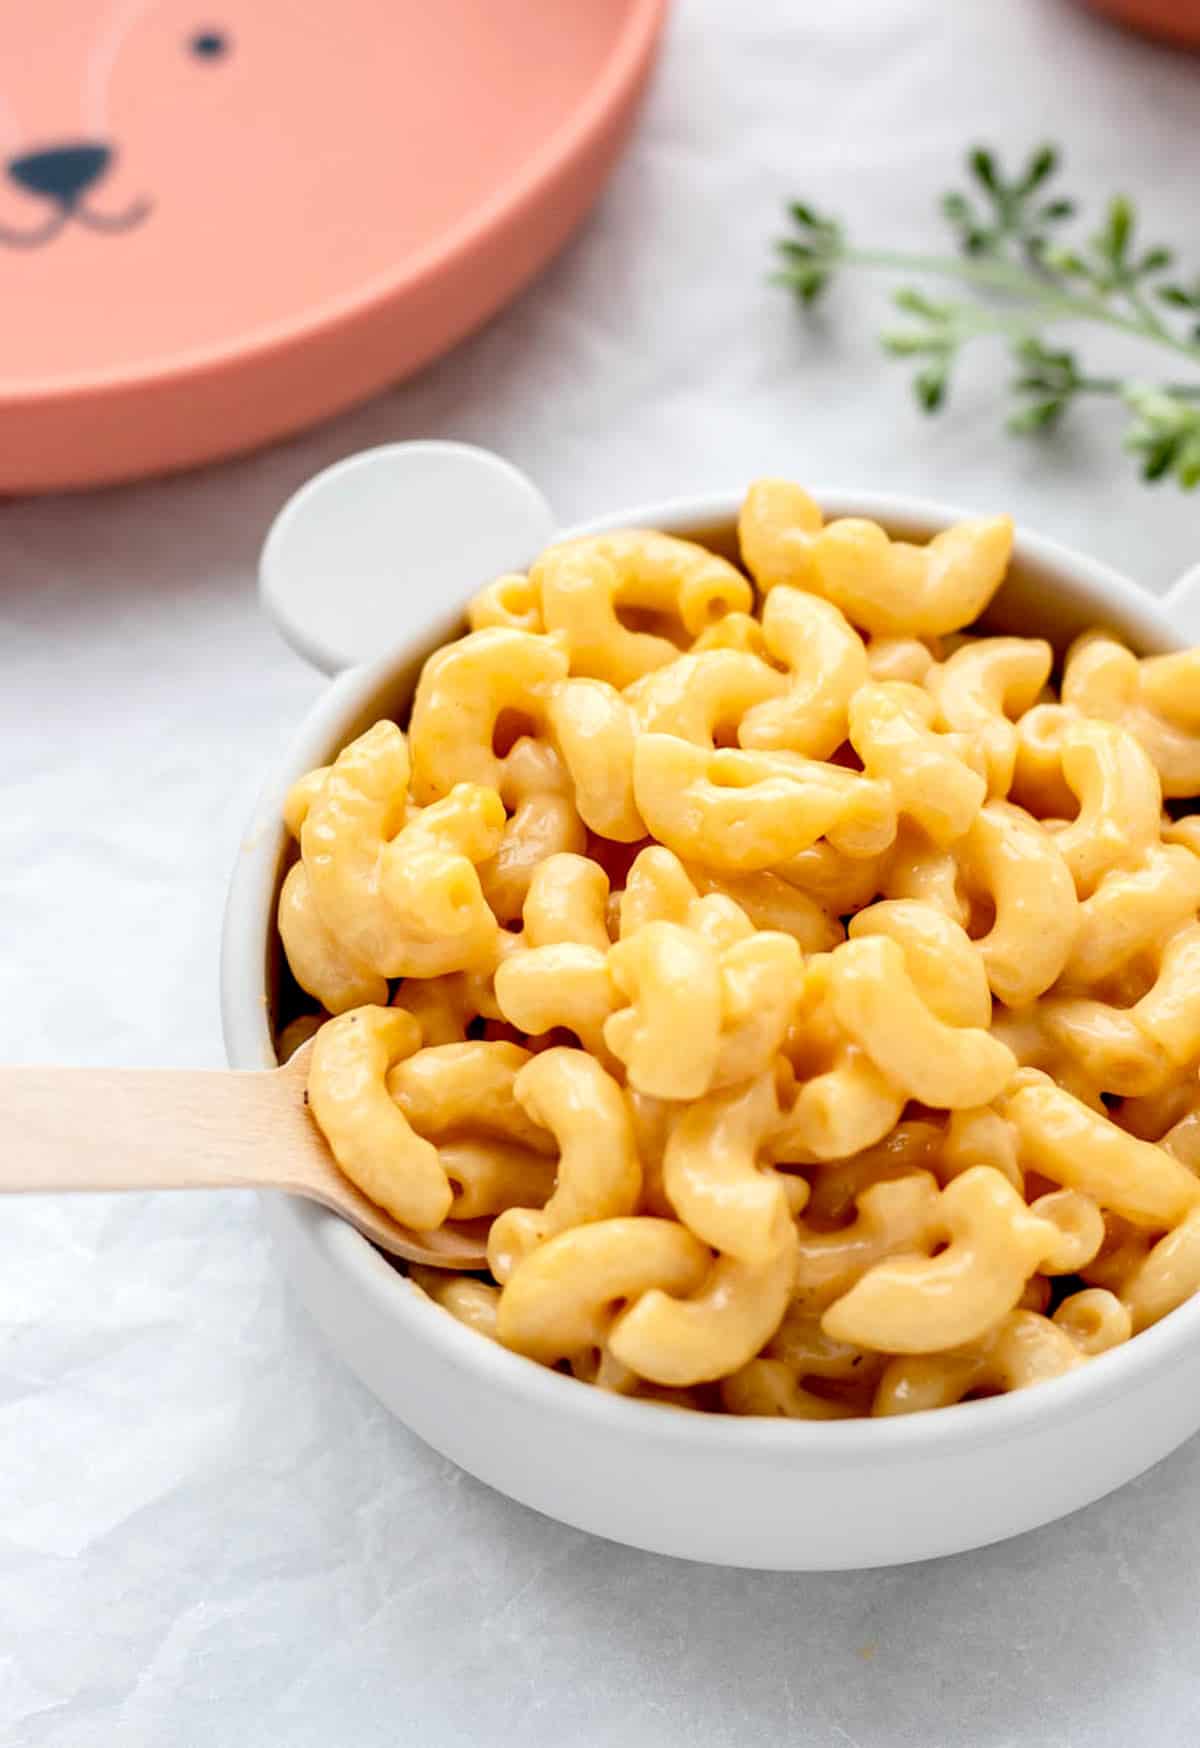 A fork digging into a bowl of creamy mac and cheese.